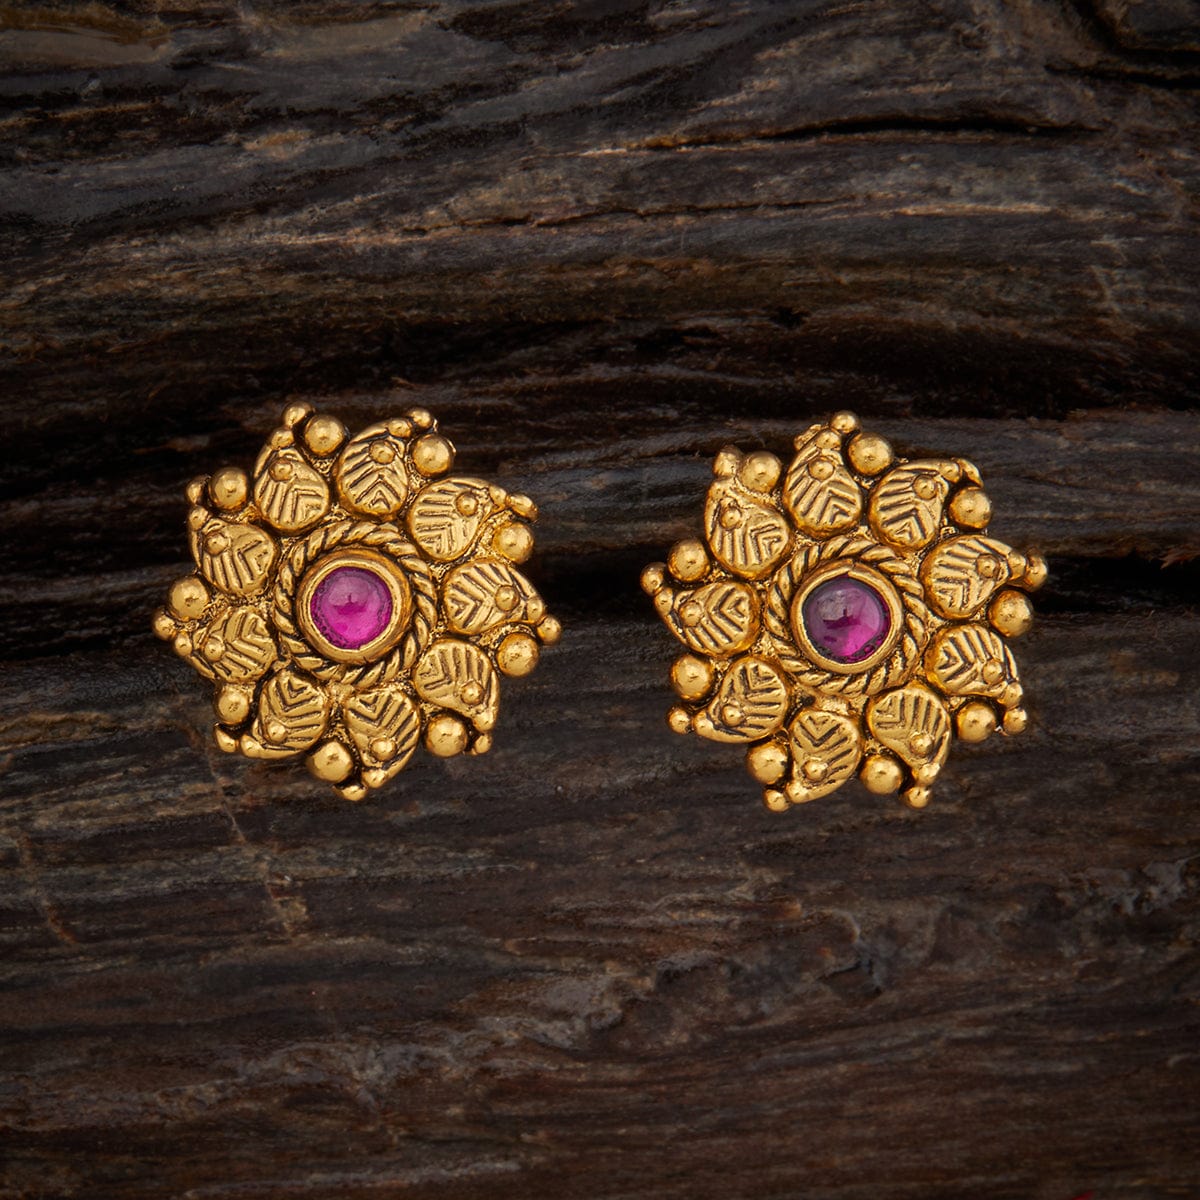 Antique Earrings: Exquisite Pieces that Illuminate Your Style with Old-World  Charm